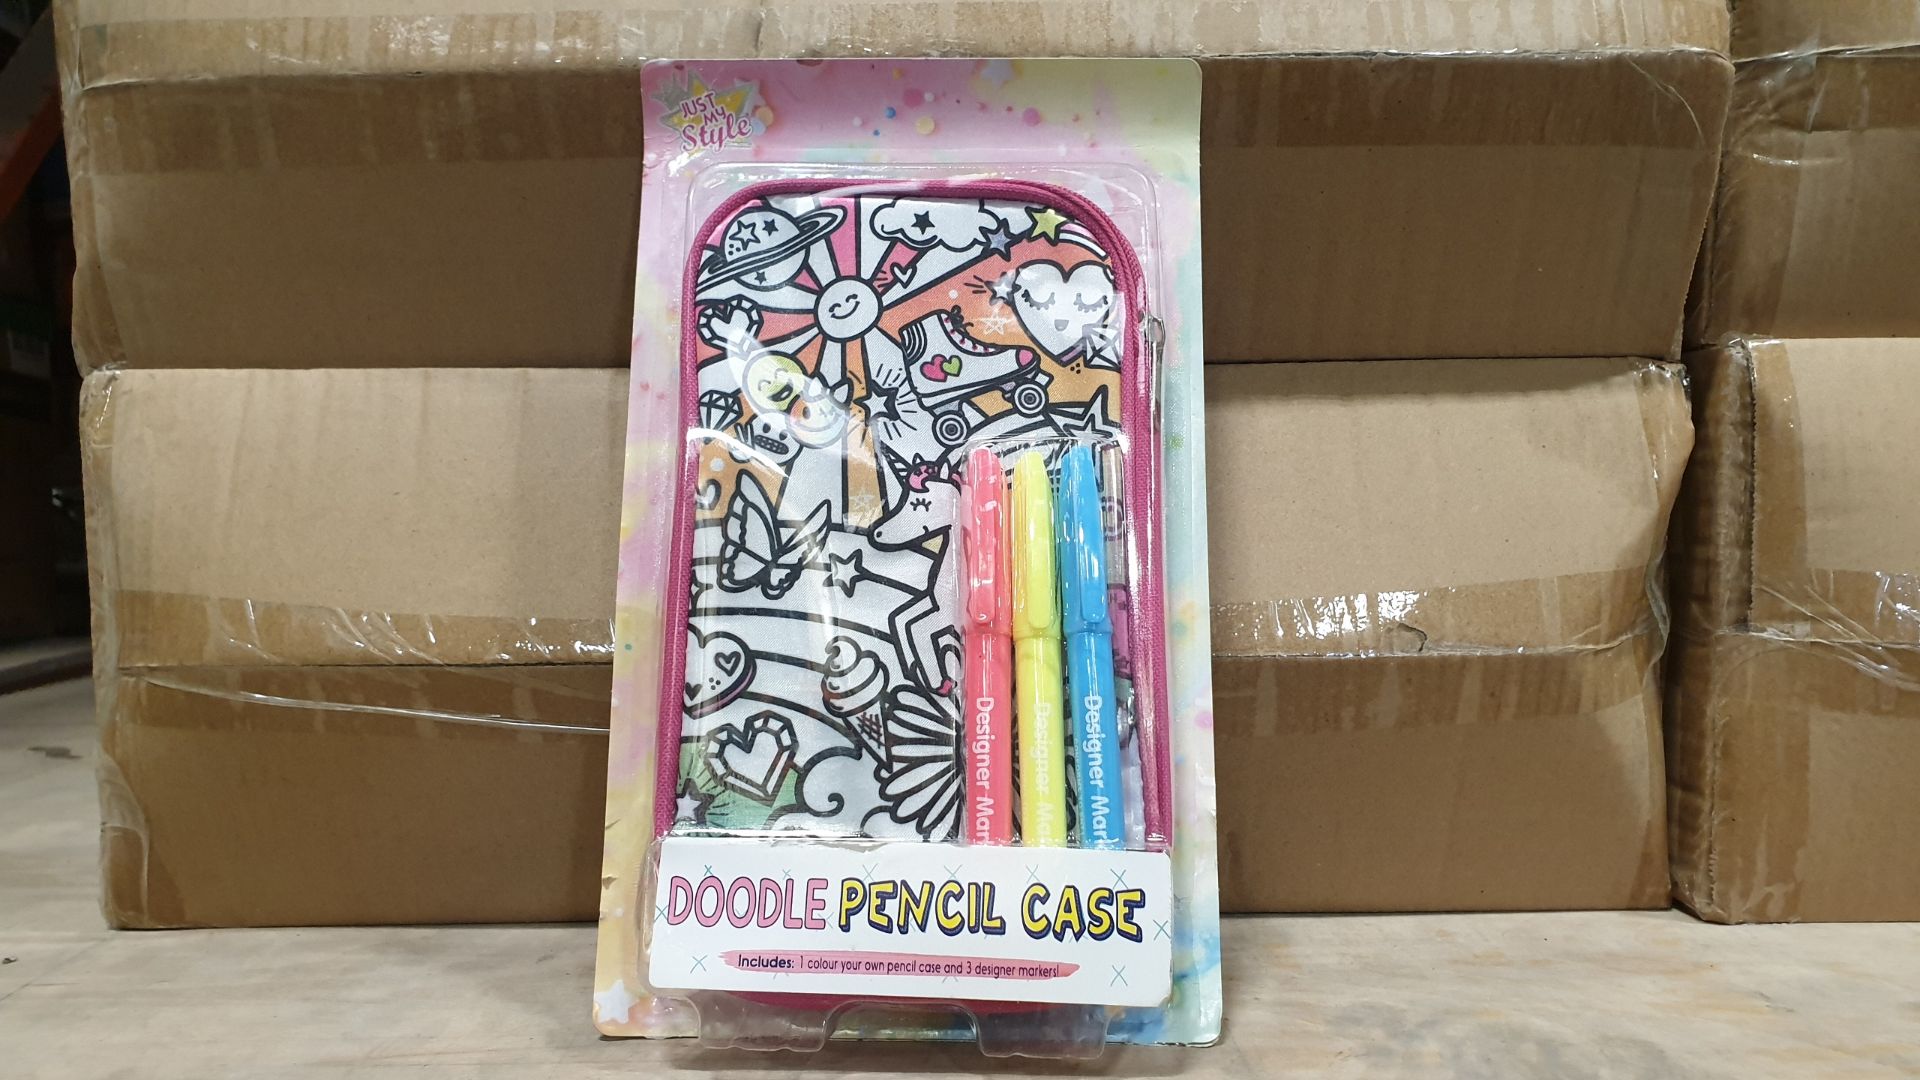 56 X BRAND NEW JUST MY STYLE DOODLE PENCIL CASE WITH CASE AND MARKERS ALL INDIVIDUALLY PACKAGED - IN